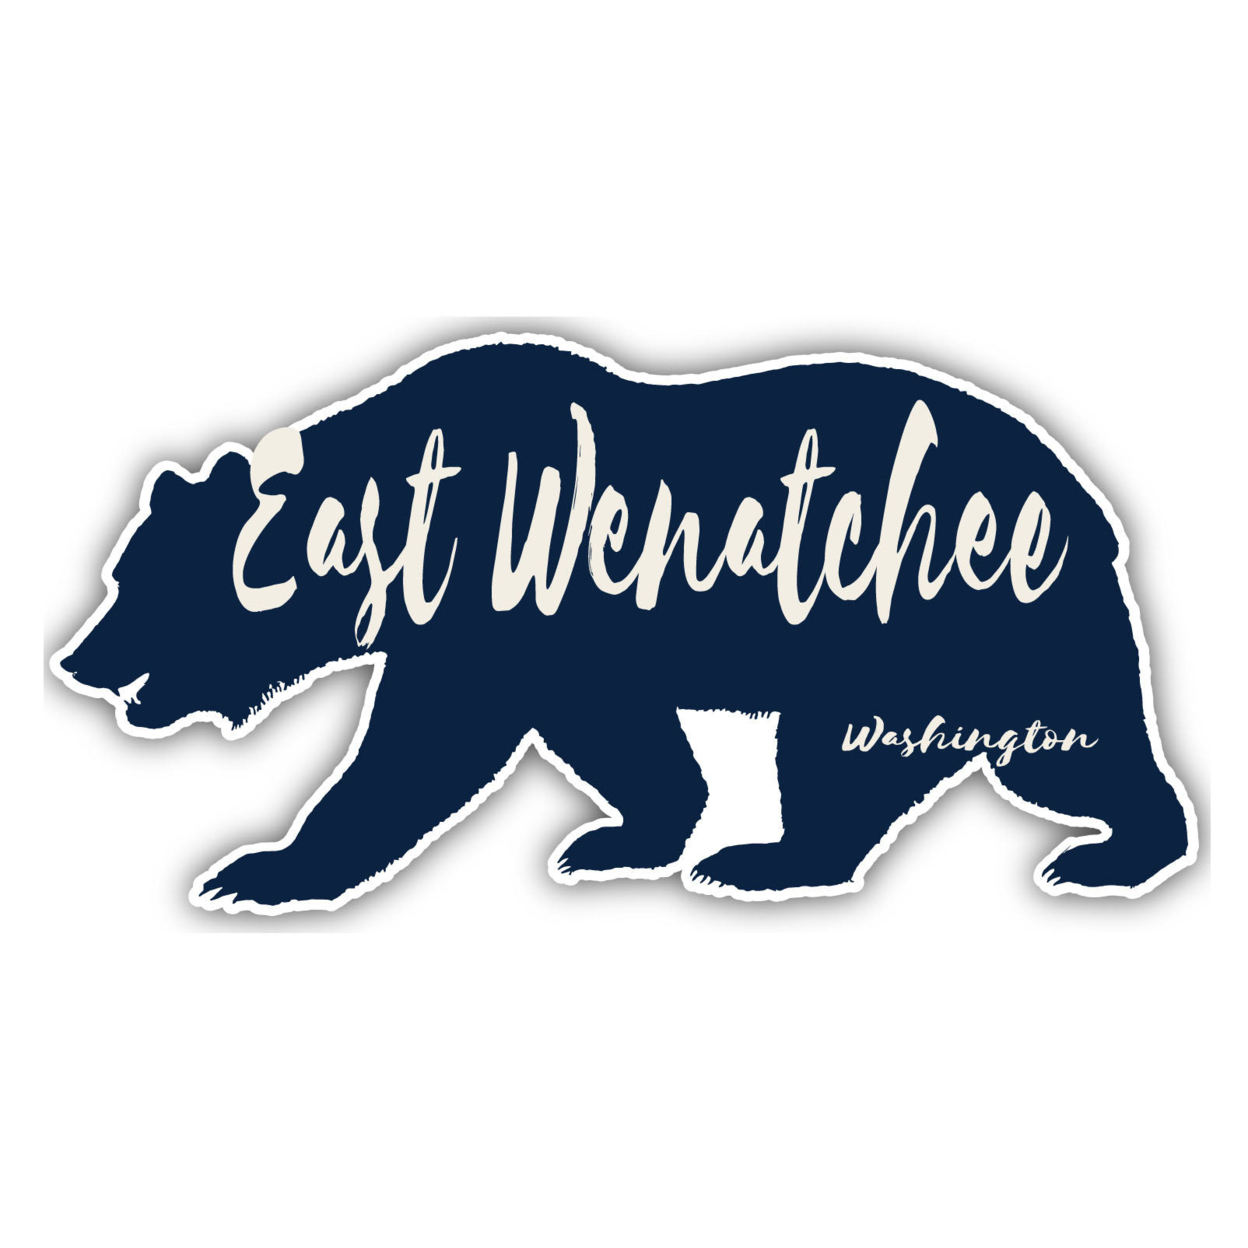 East Wenatchee Washington Souvenir Decorative Stickers (Choose Theme And Size) - 4-Pack, 6-Inch, Great Outdoors